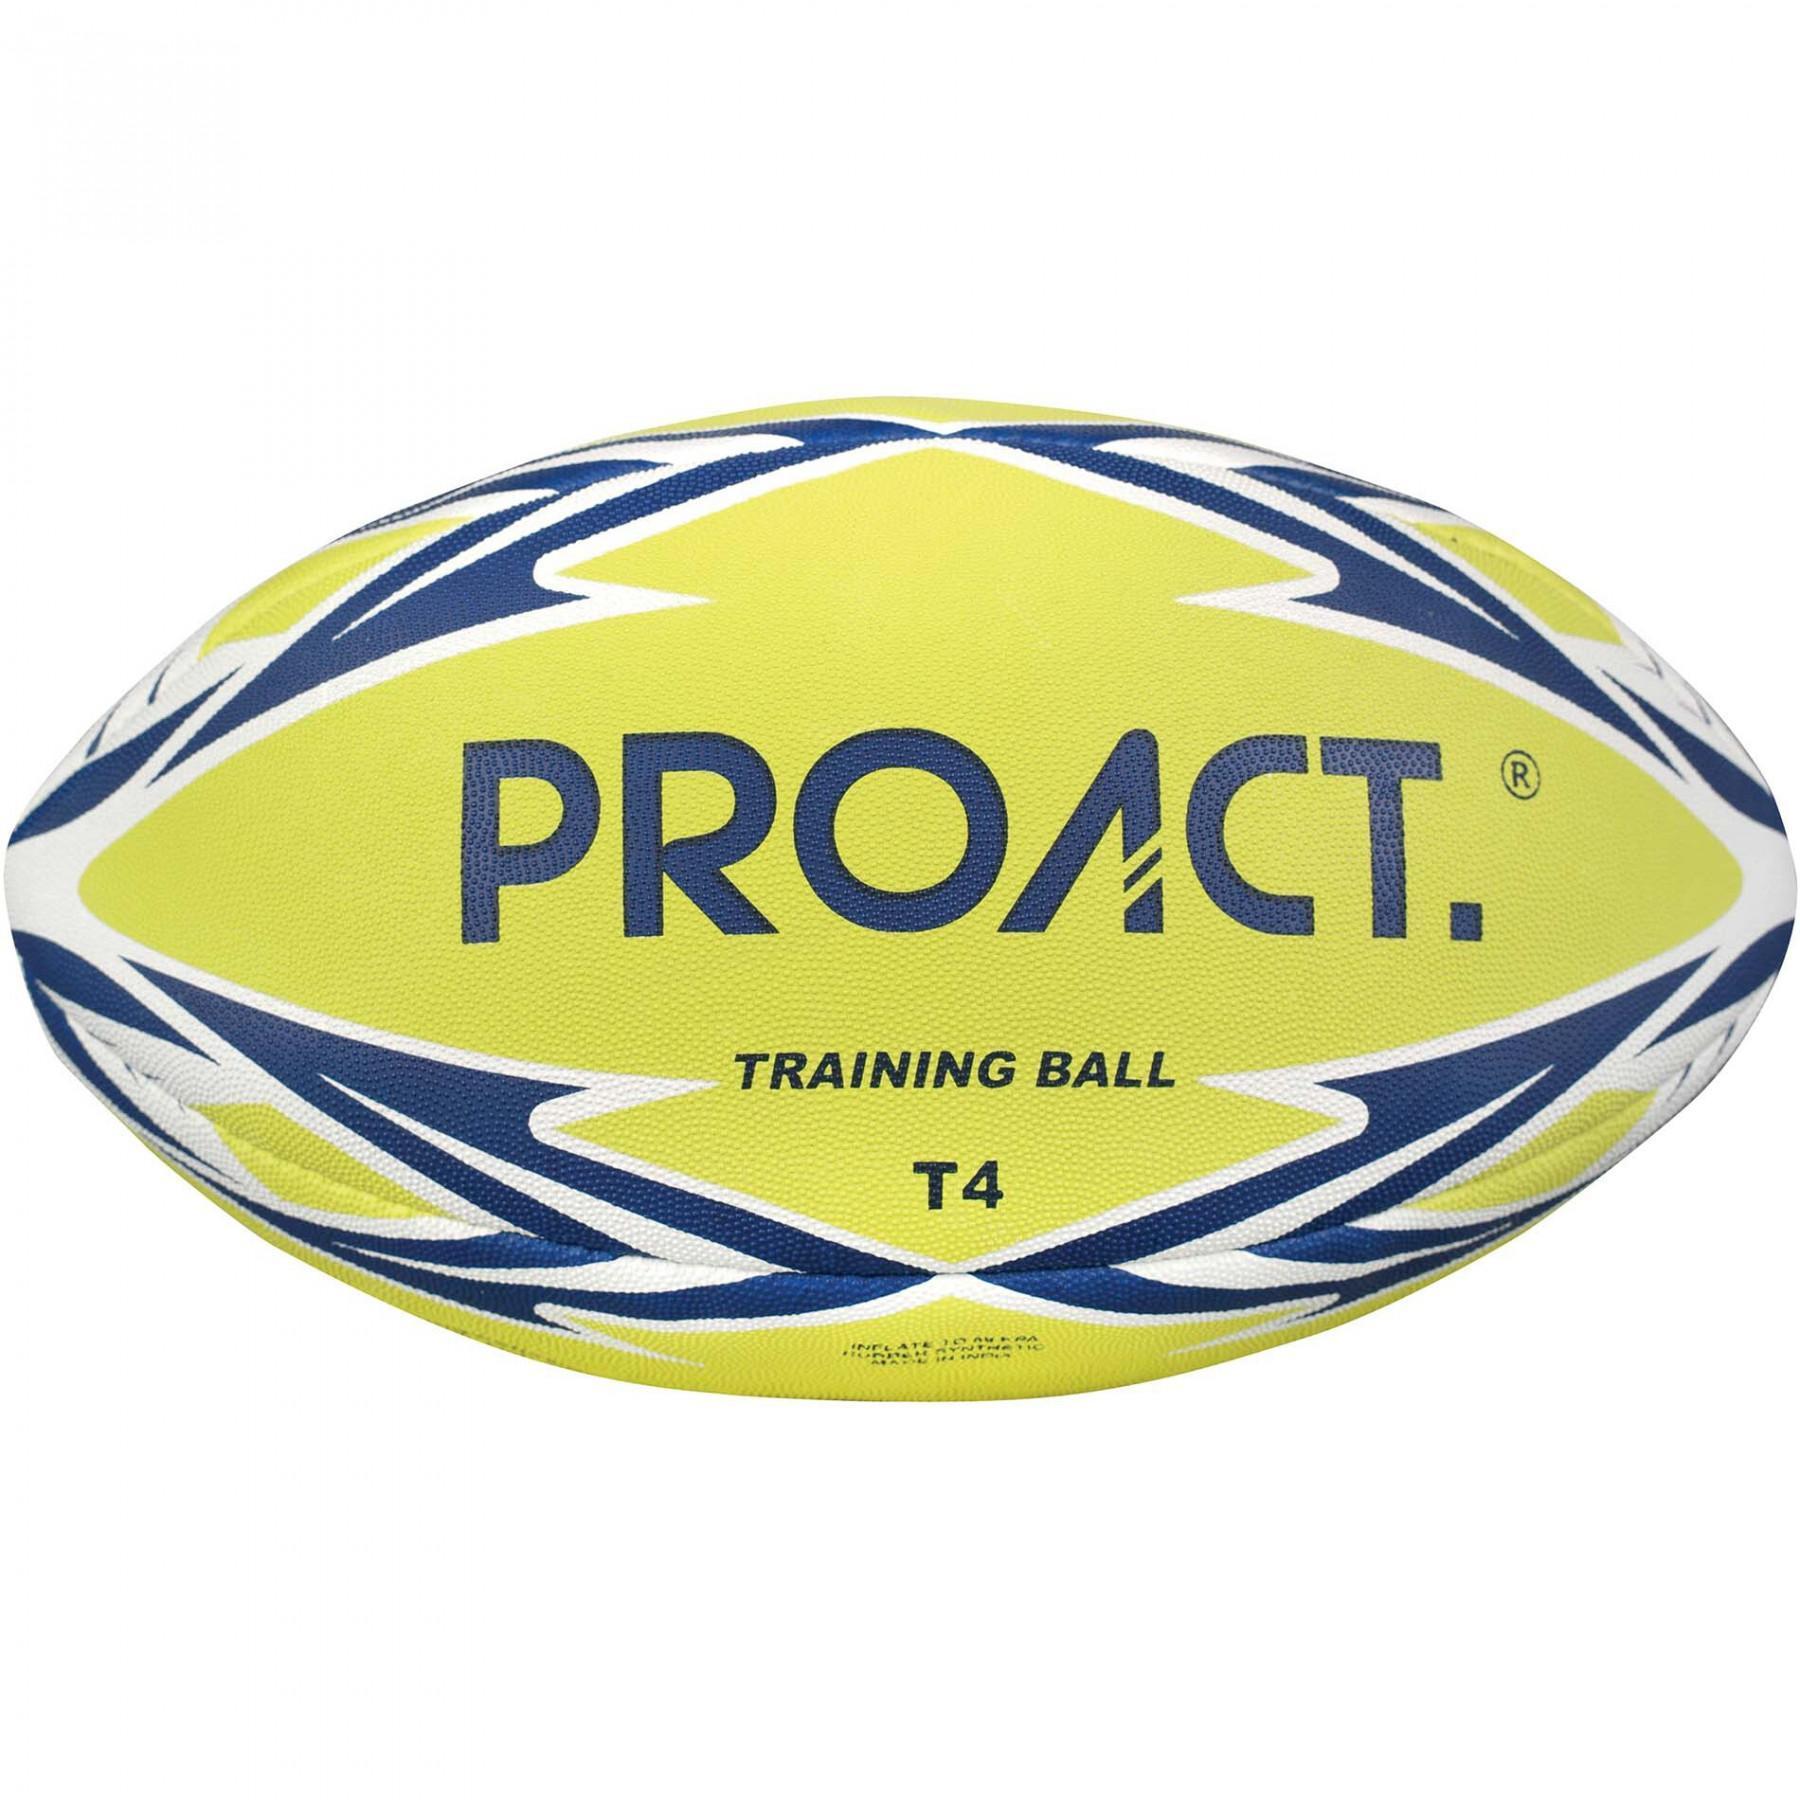 Rugbyball Proact Challenger